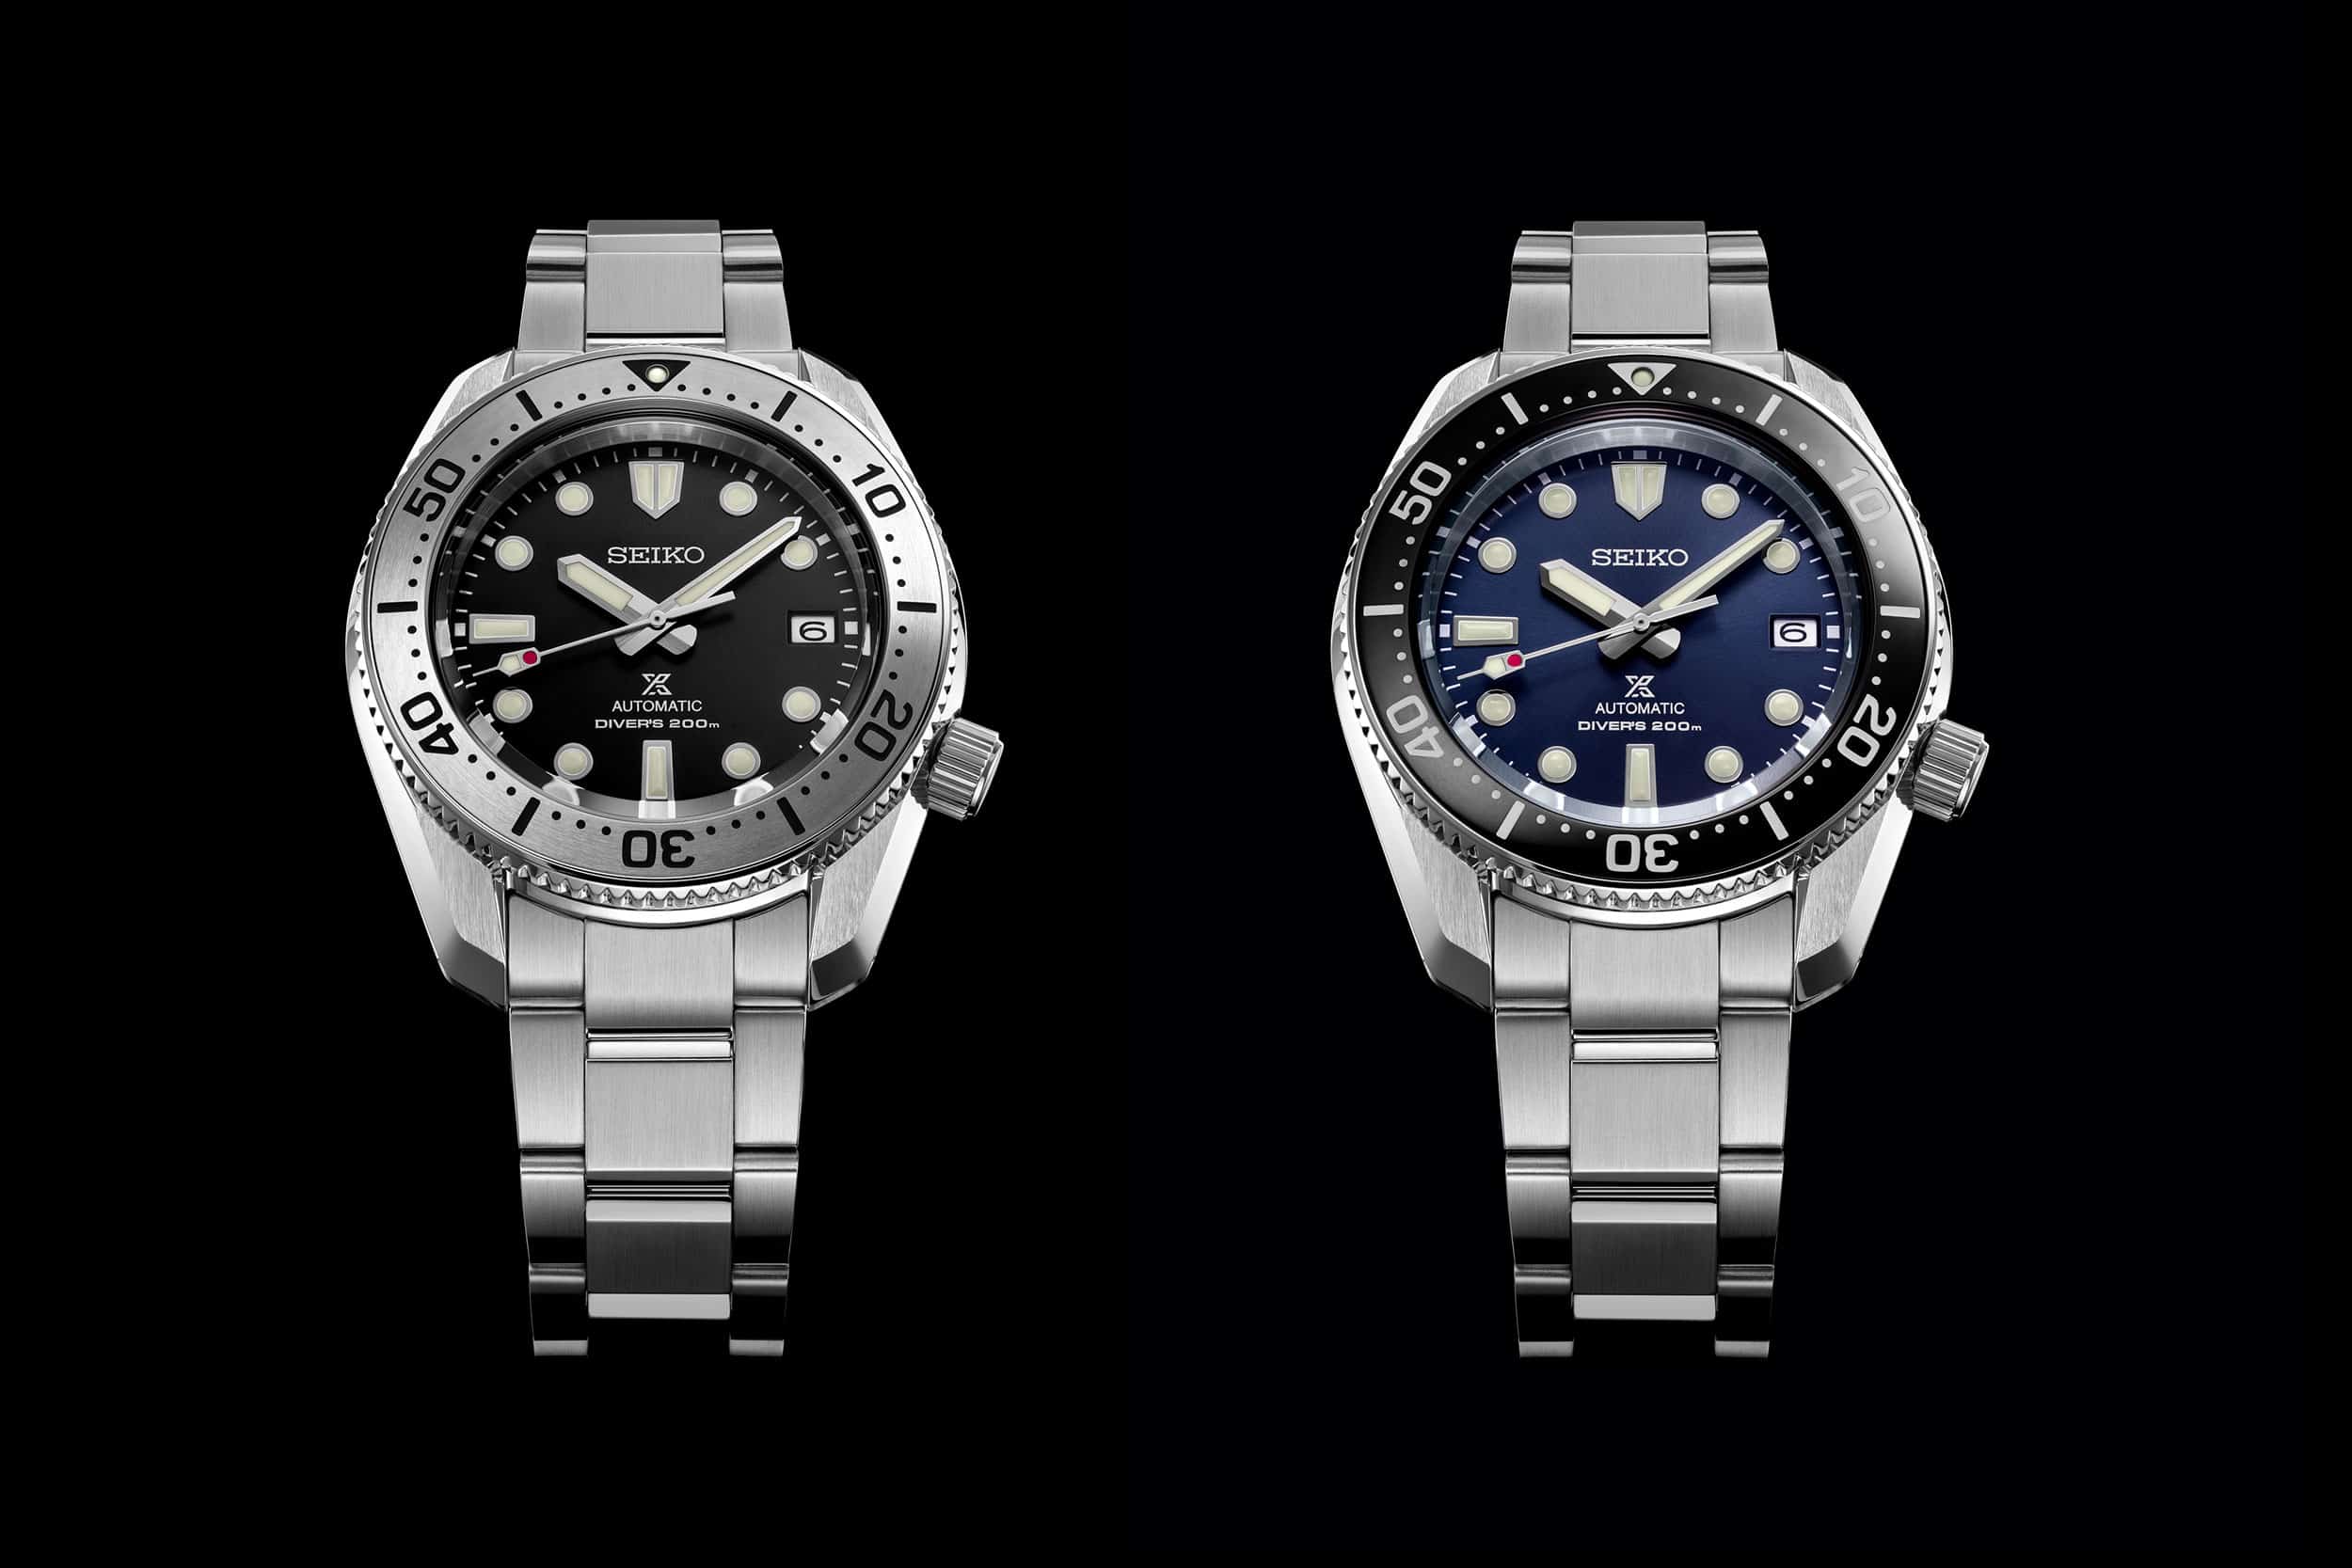 Introducing the Seiko Prospex SPB185 and SPB187, the Newest Additions to the 6159 Lineage